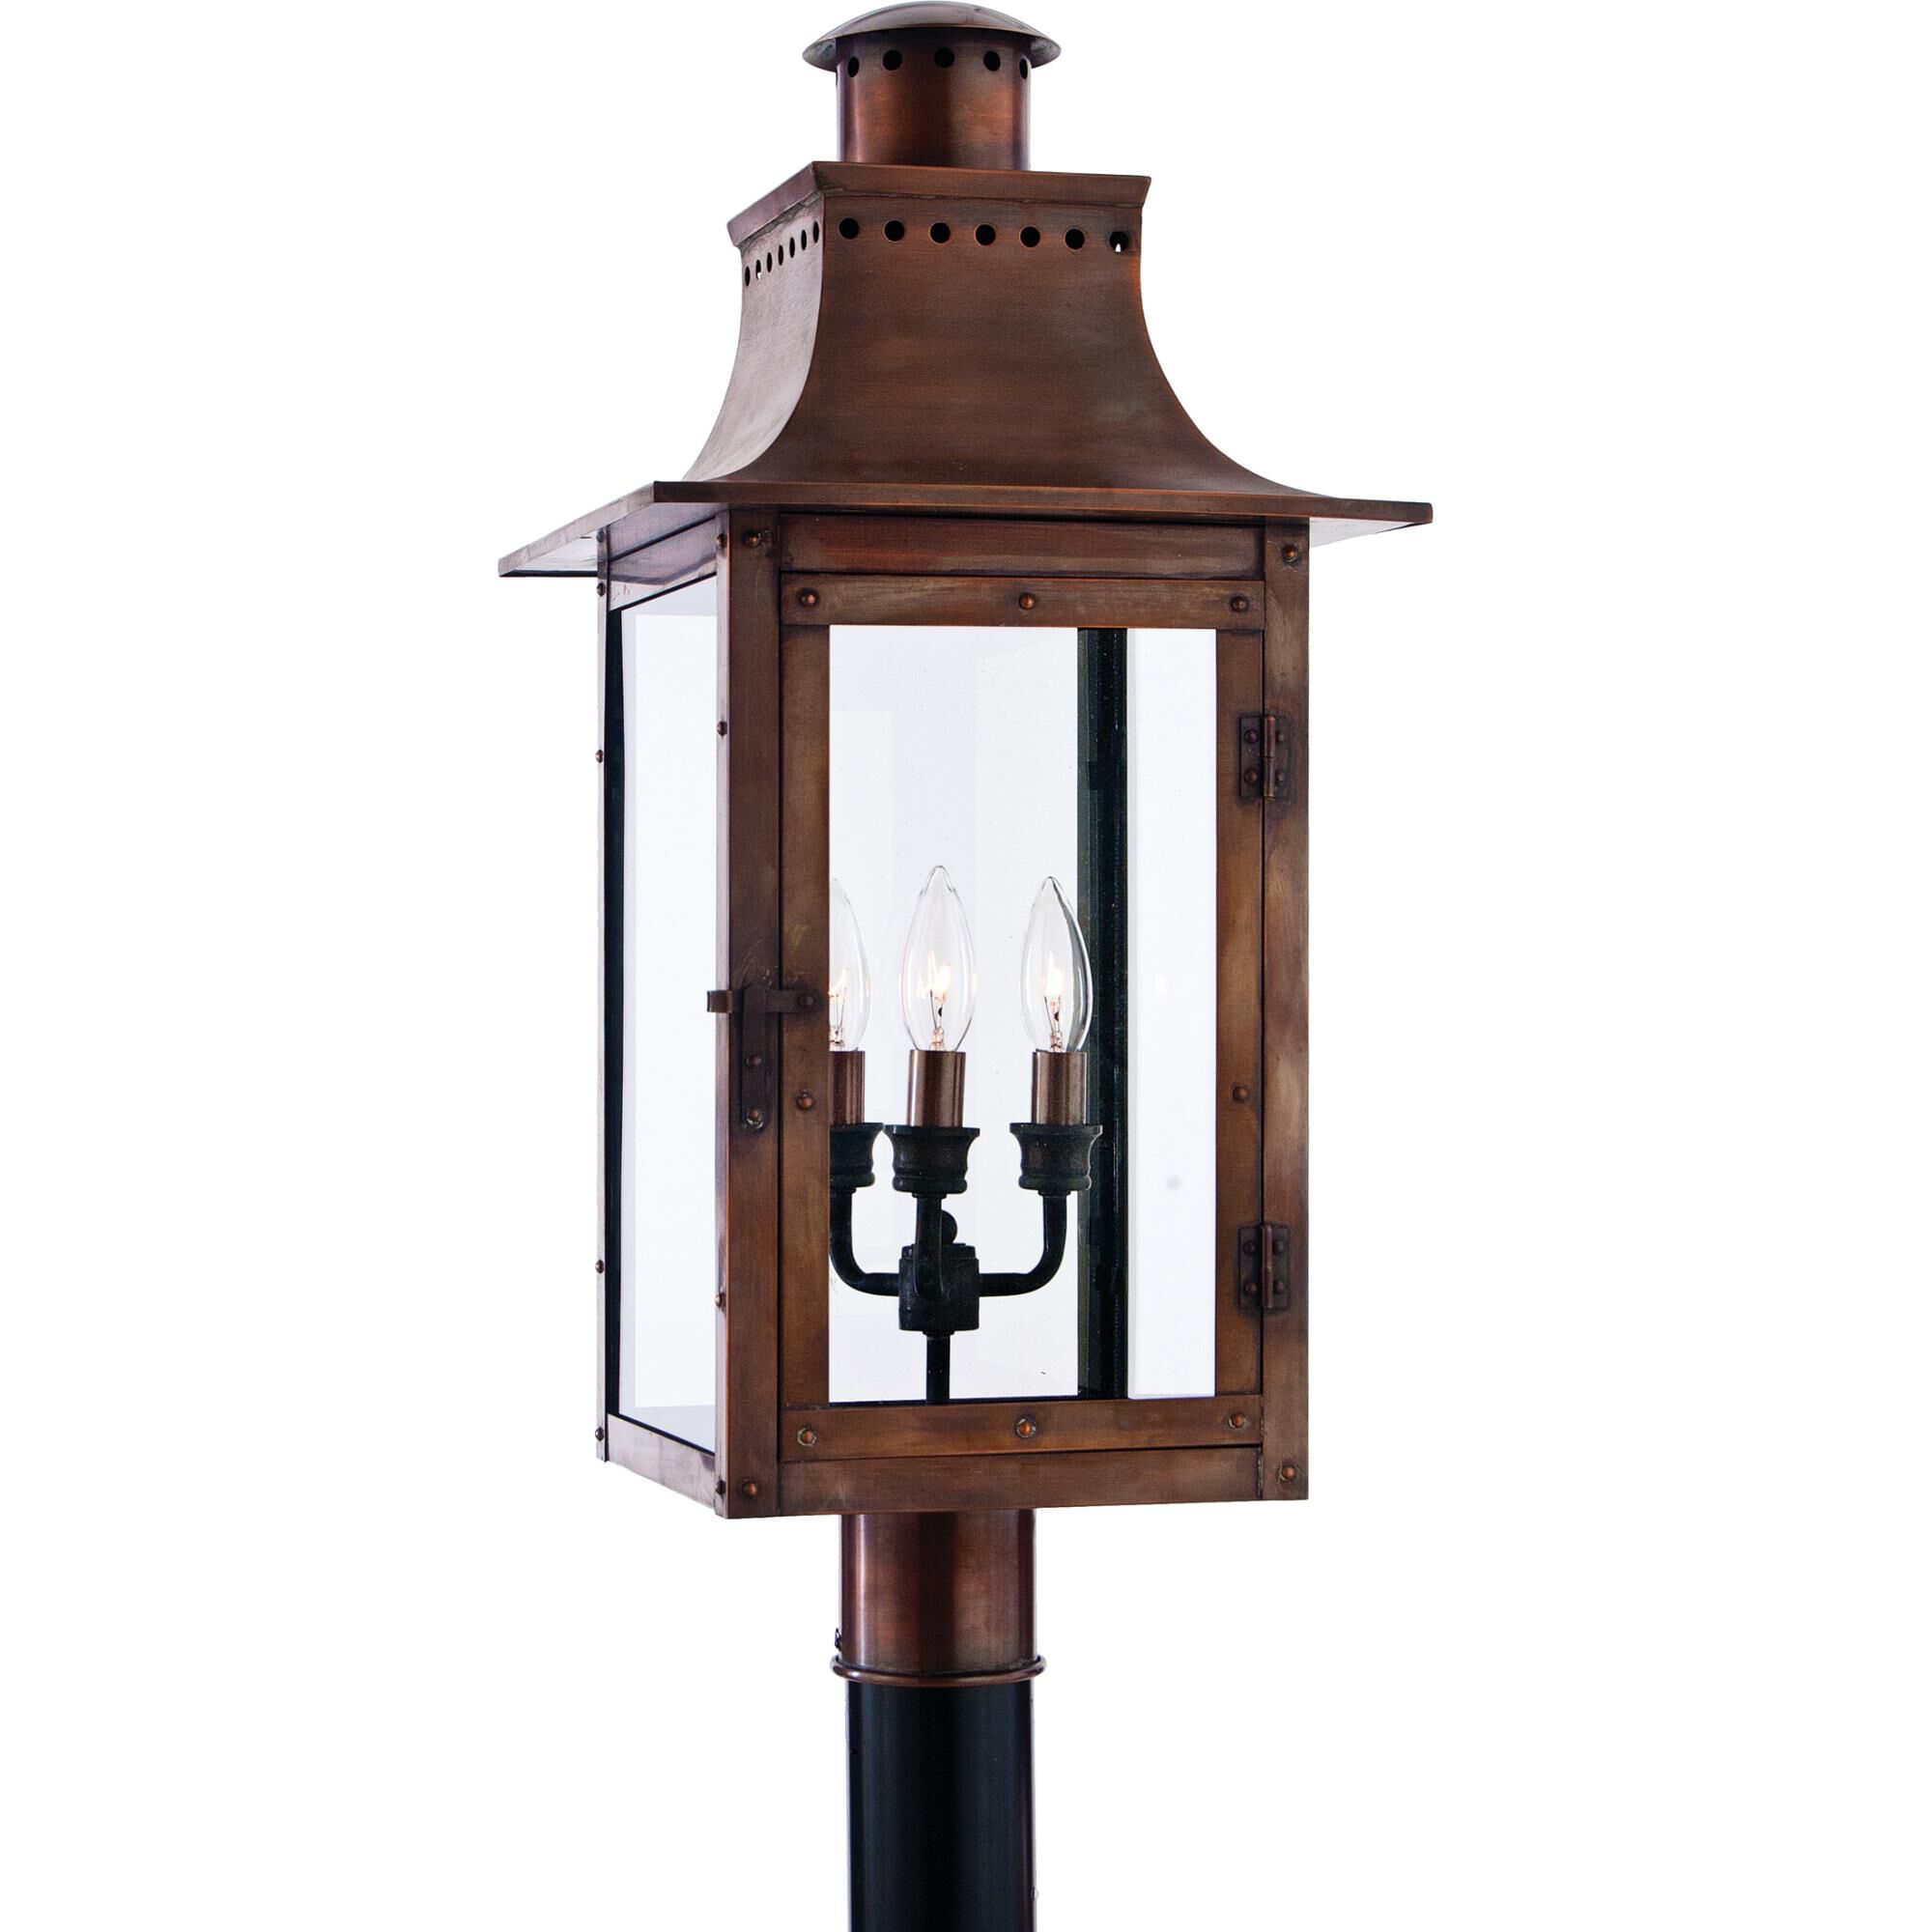 Photos - Floodlight / Garden Lamps Quoizel Chalmers 26 Inch Tall 3 Light Outdoor Post Lamp Chalmers - CM9012A 